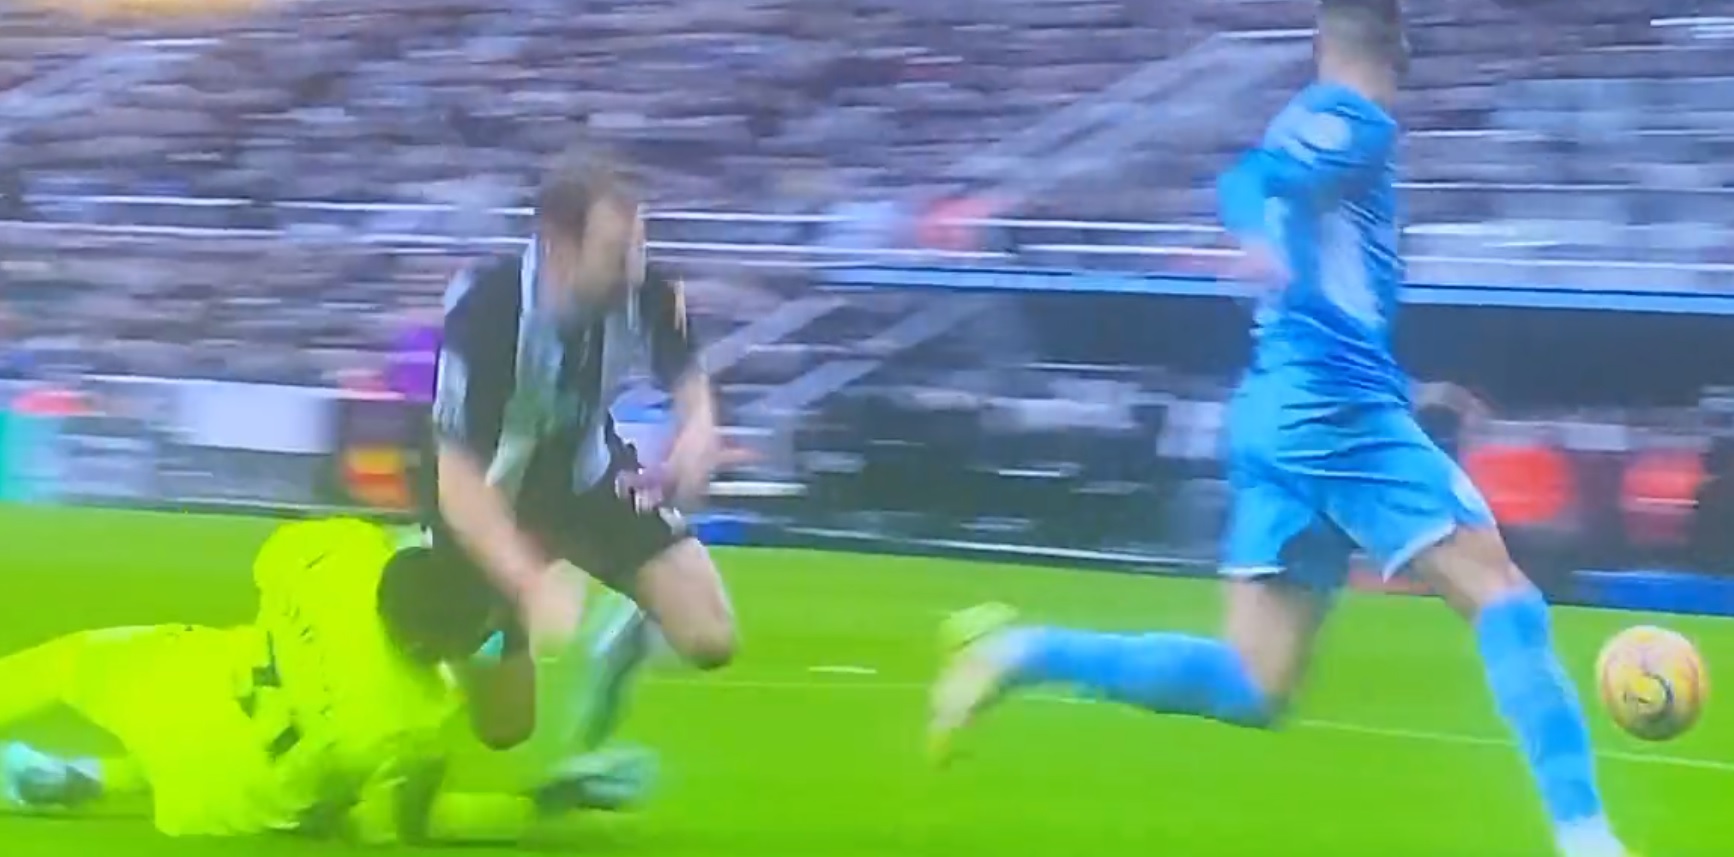 (Video) Woeful refereeing sees City get away with one as Newcastle player clattered by Ederson with VAR nowhere to be seen